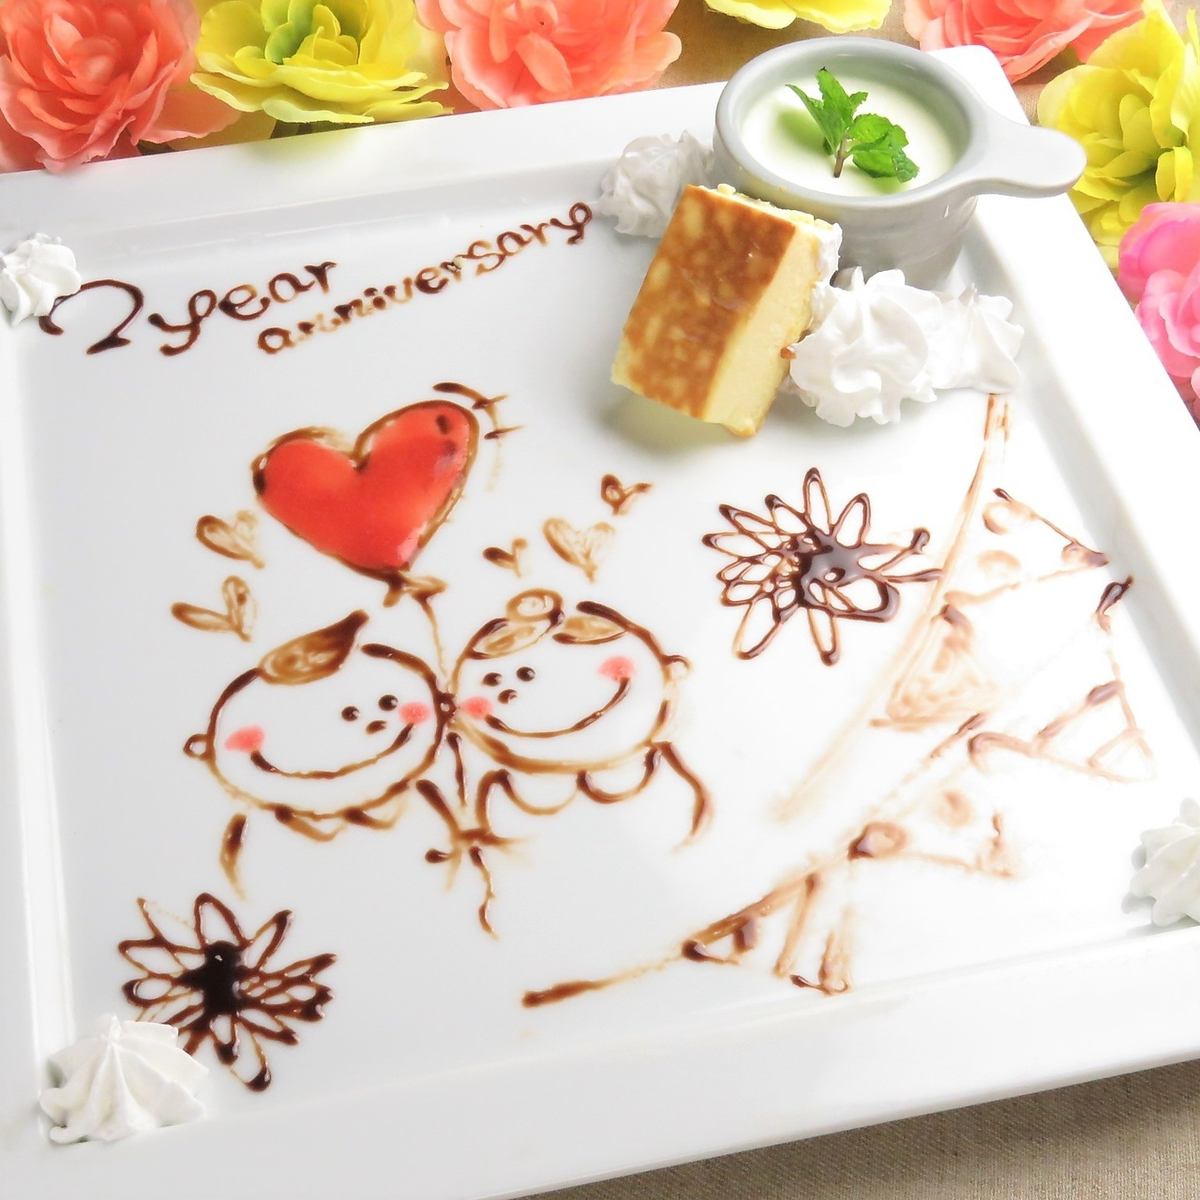 Put your thoughts on your loved ones ... We have a cute message plate ♪